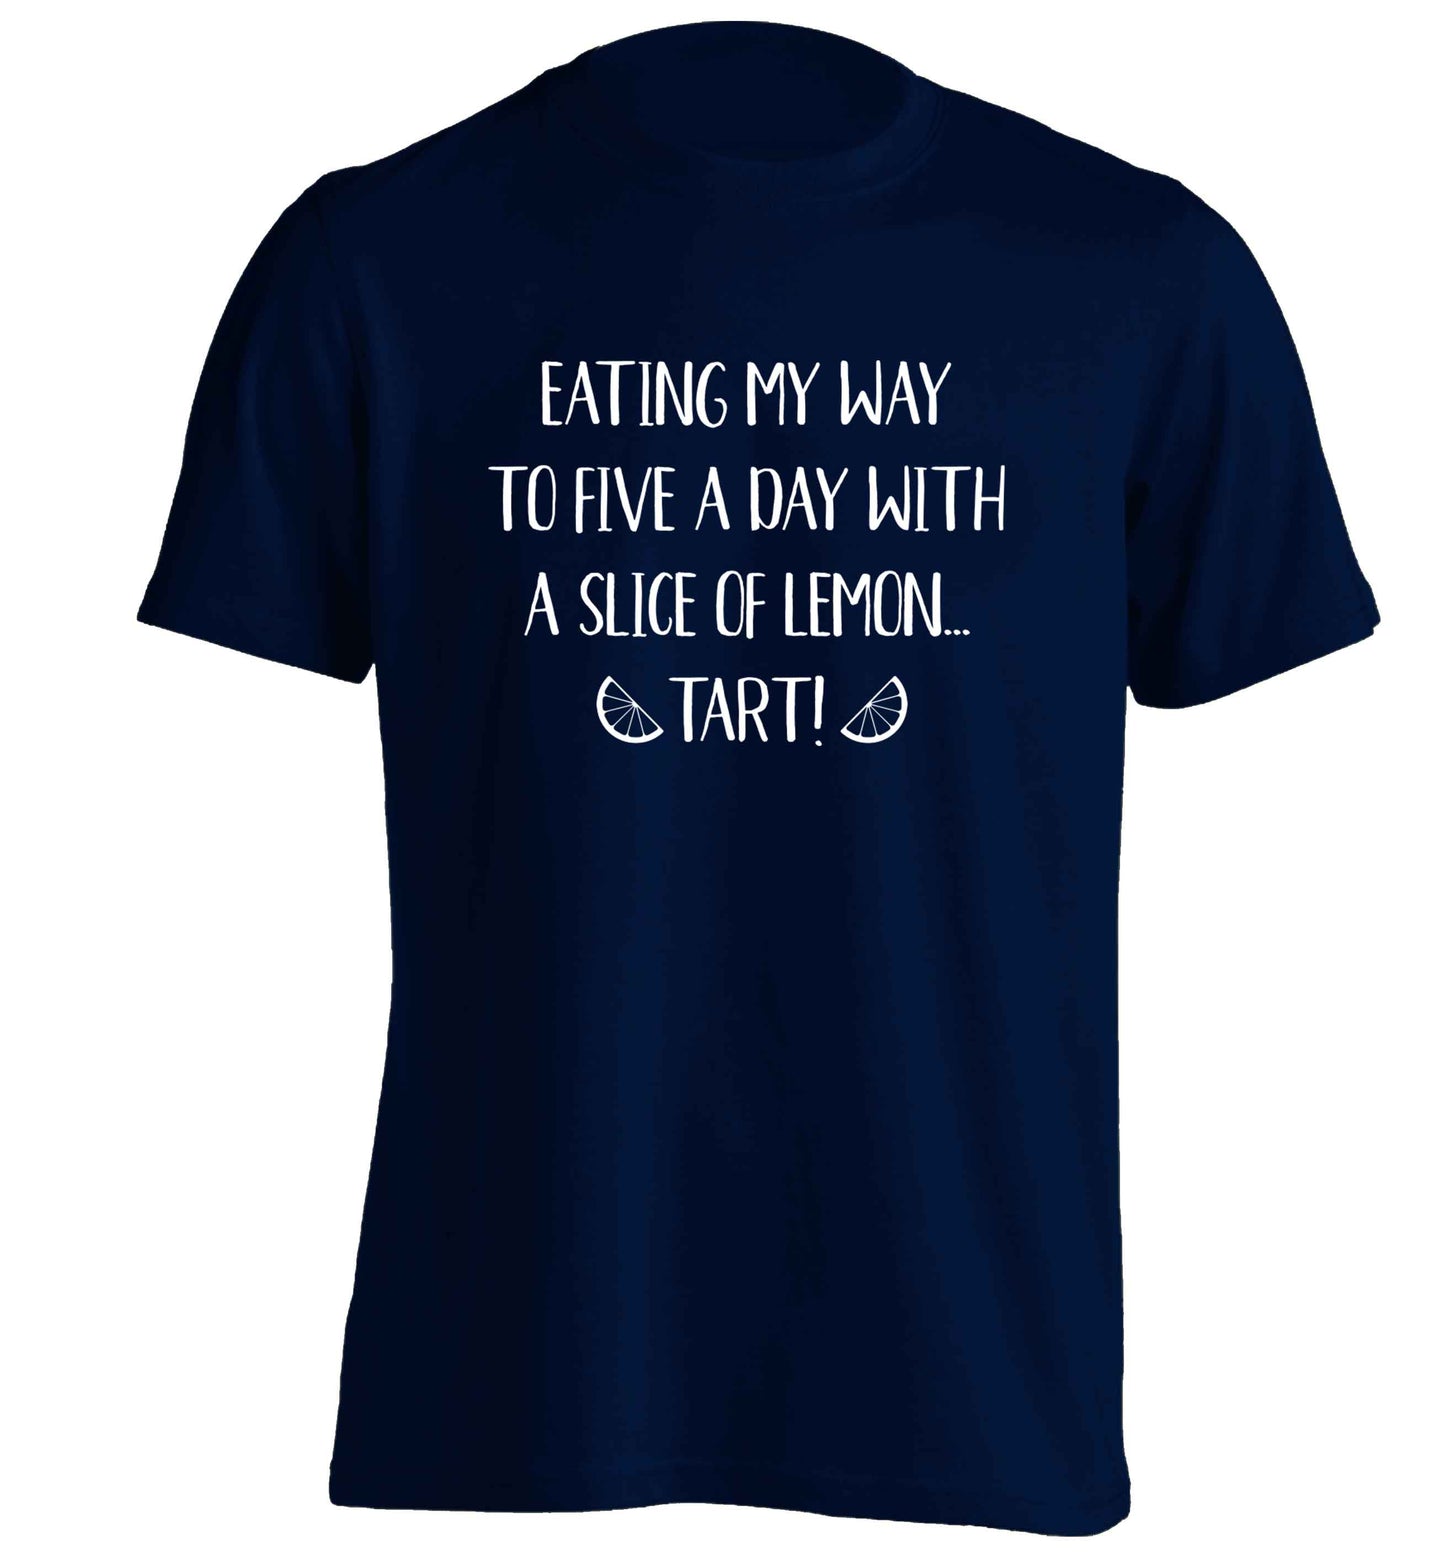 Eating my way to five a day with a slice of lemon tart adults unisex navy Tshirt 2XL